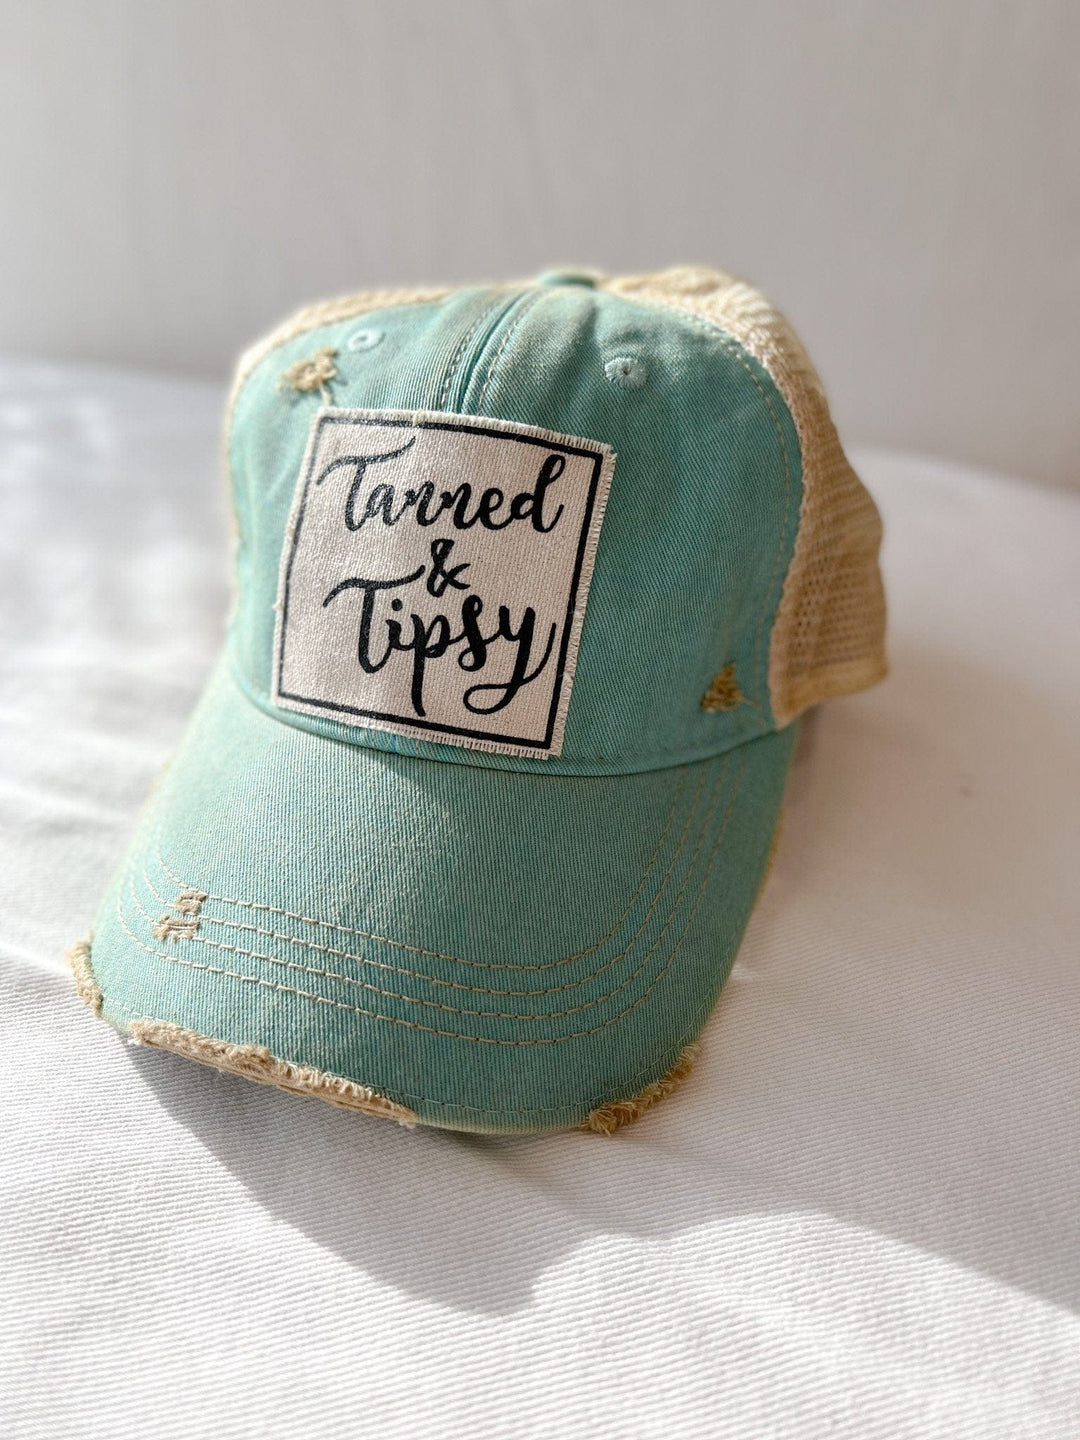 Vintage Life Cap Tanned and Tipsy Cap Mint